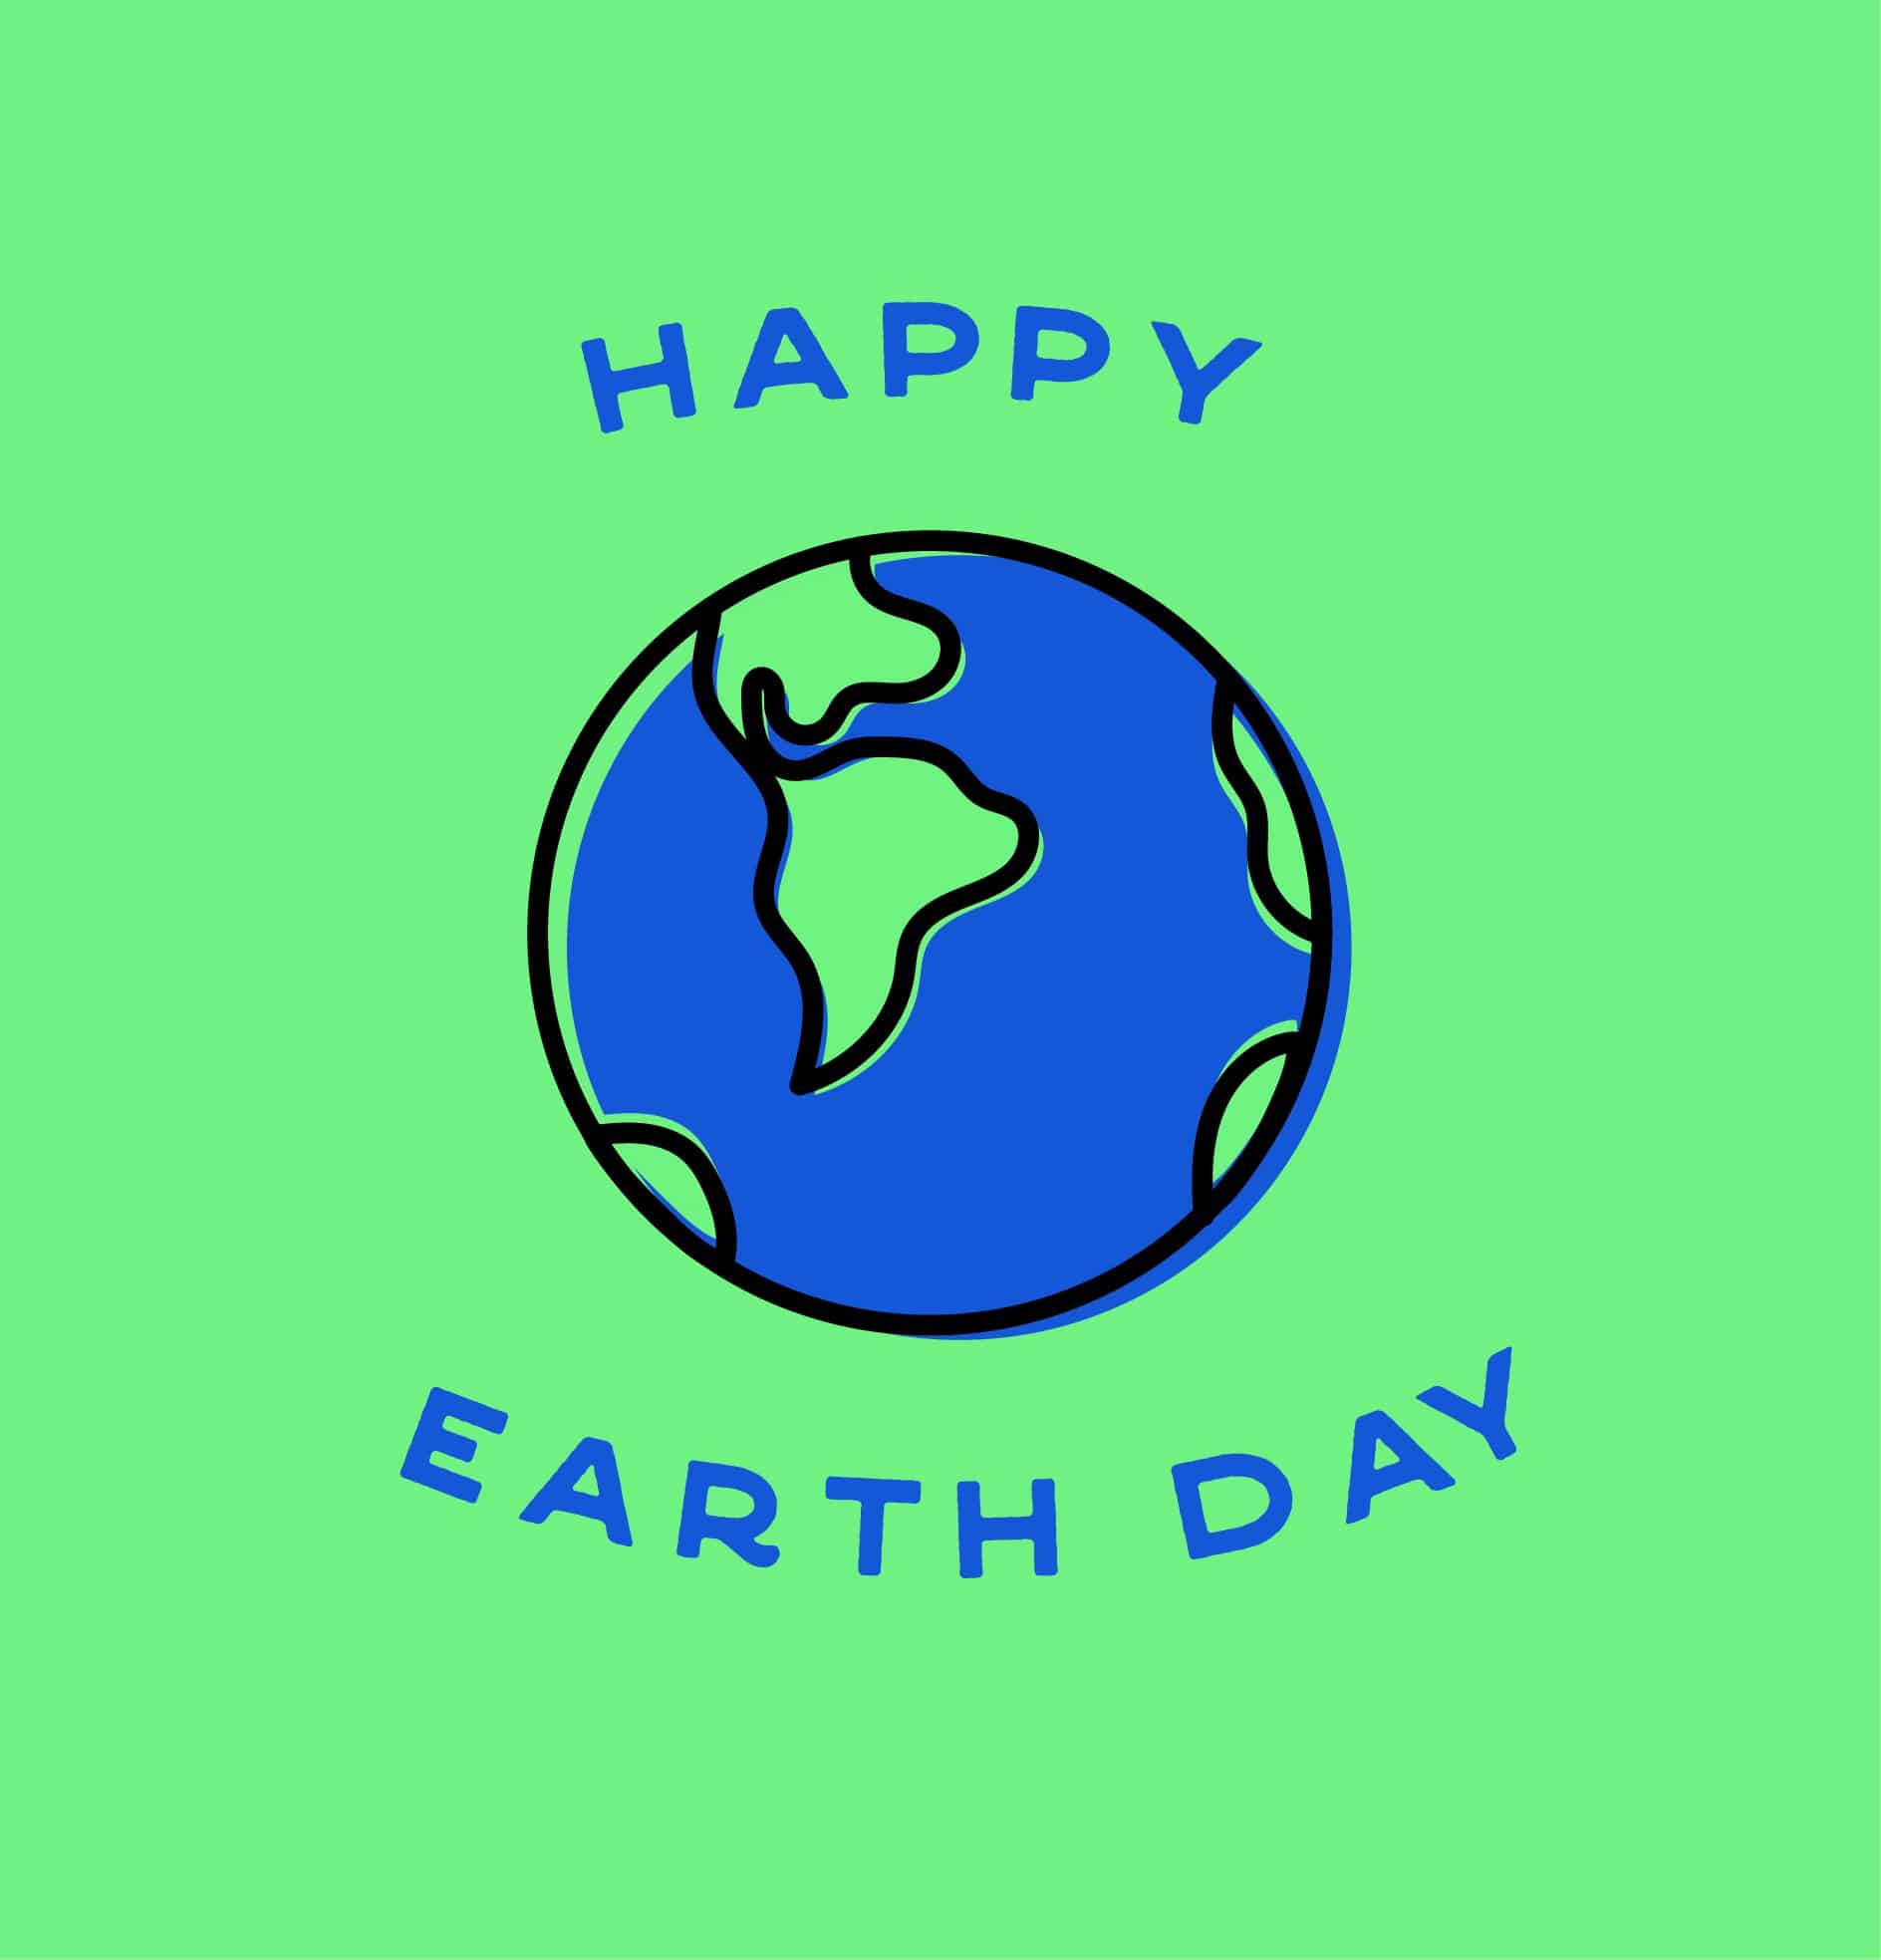 Graphic for Earth Day with a drawn earth in the center and the words "Happy Earth Day"